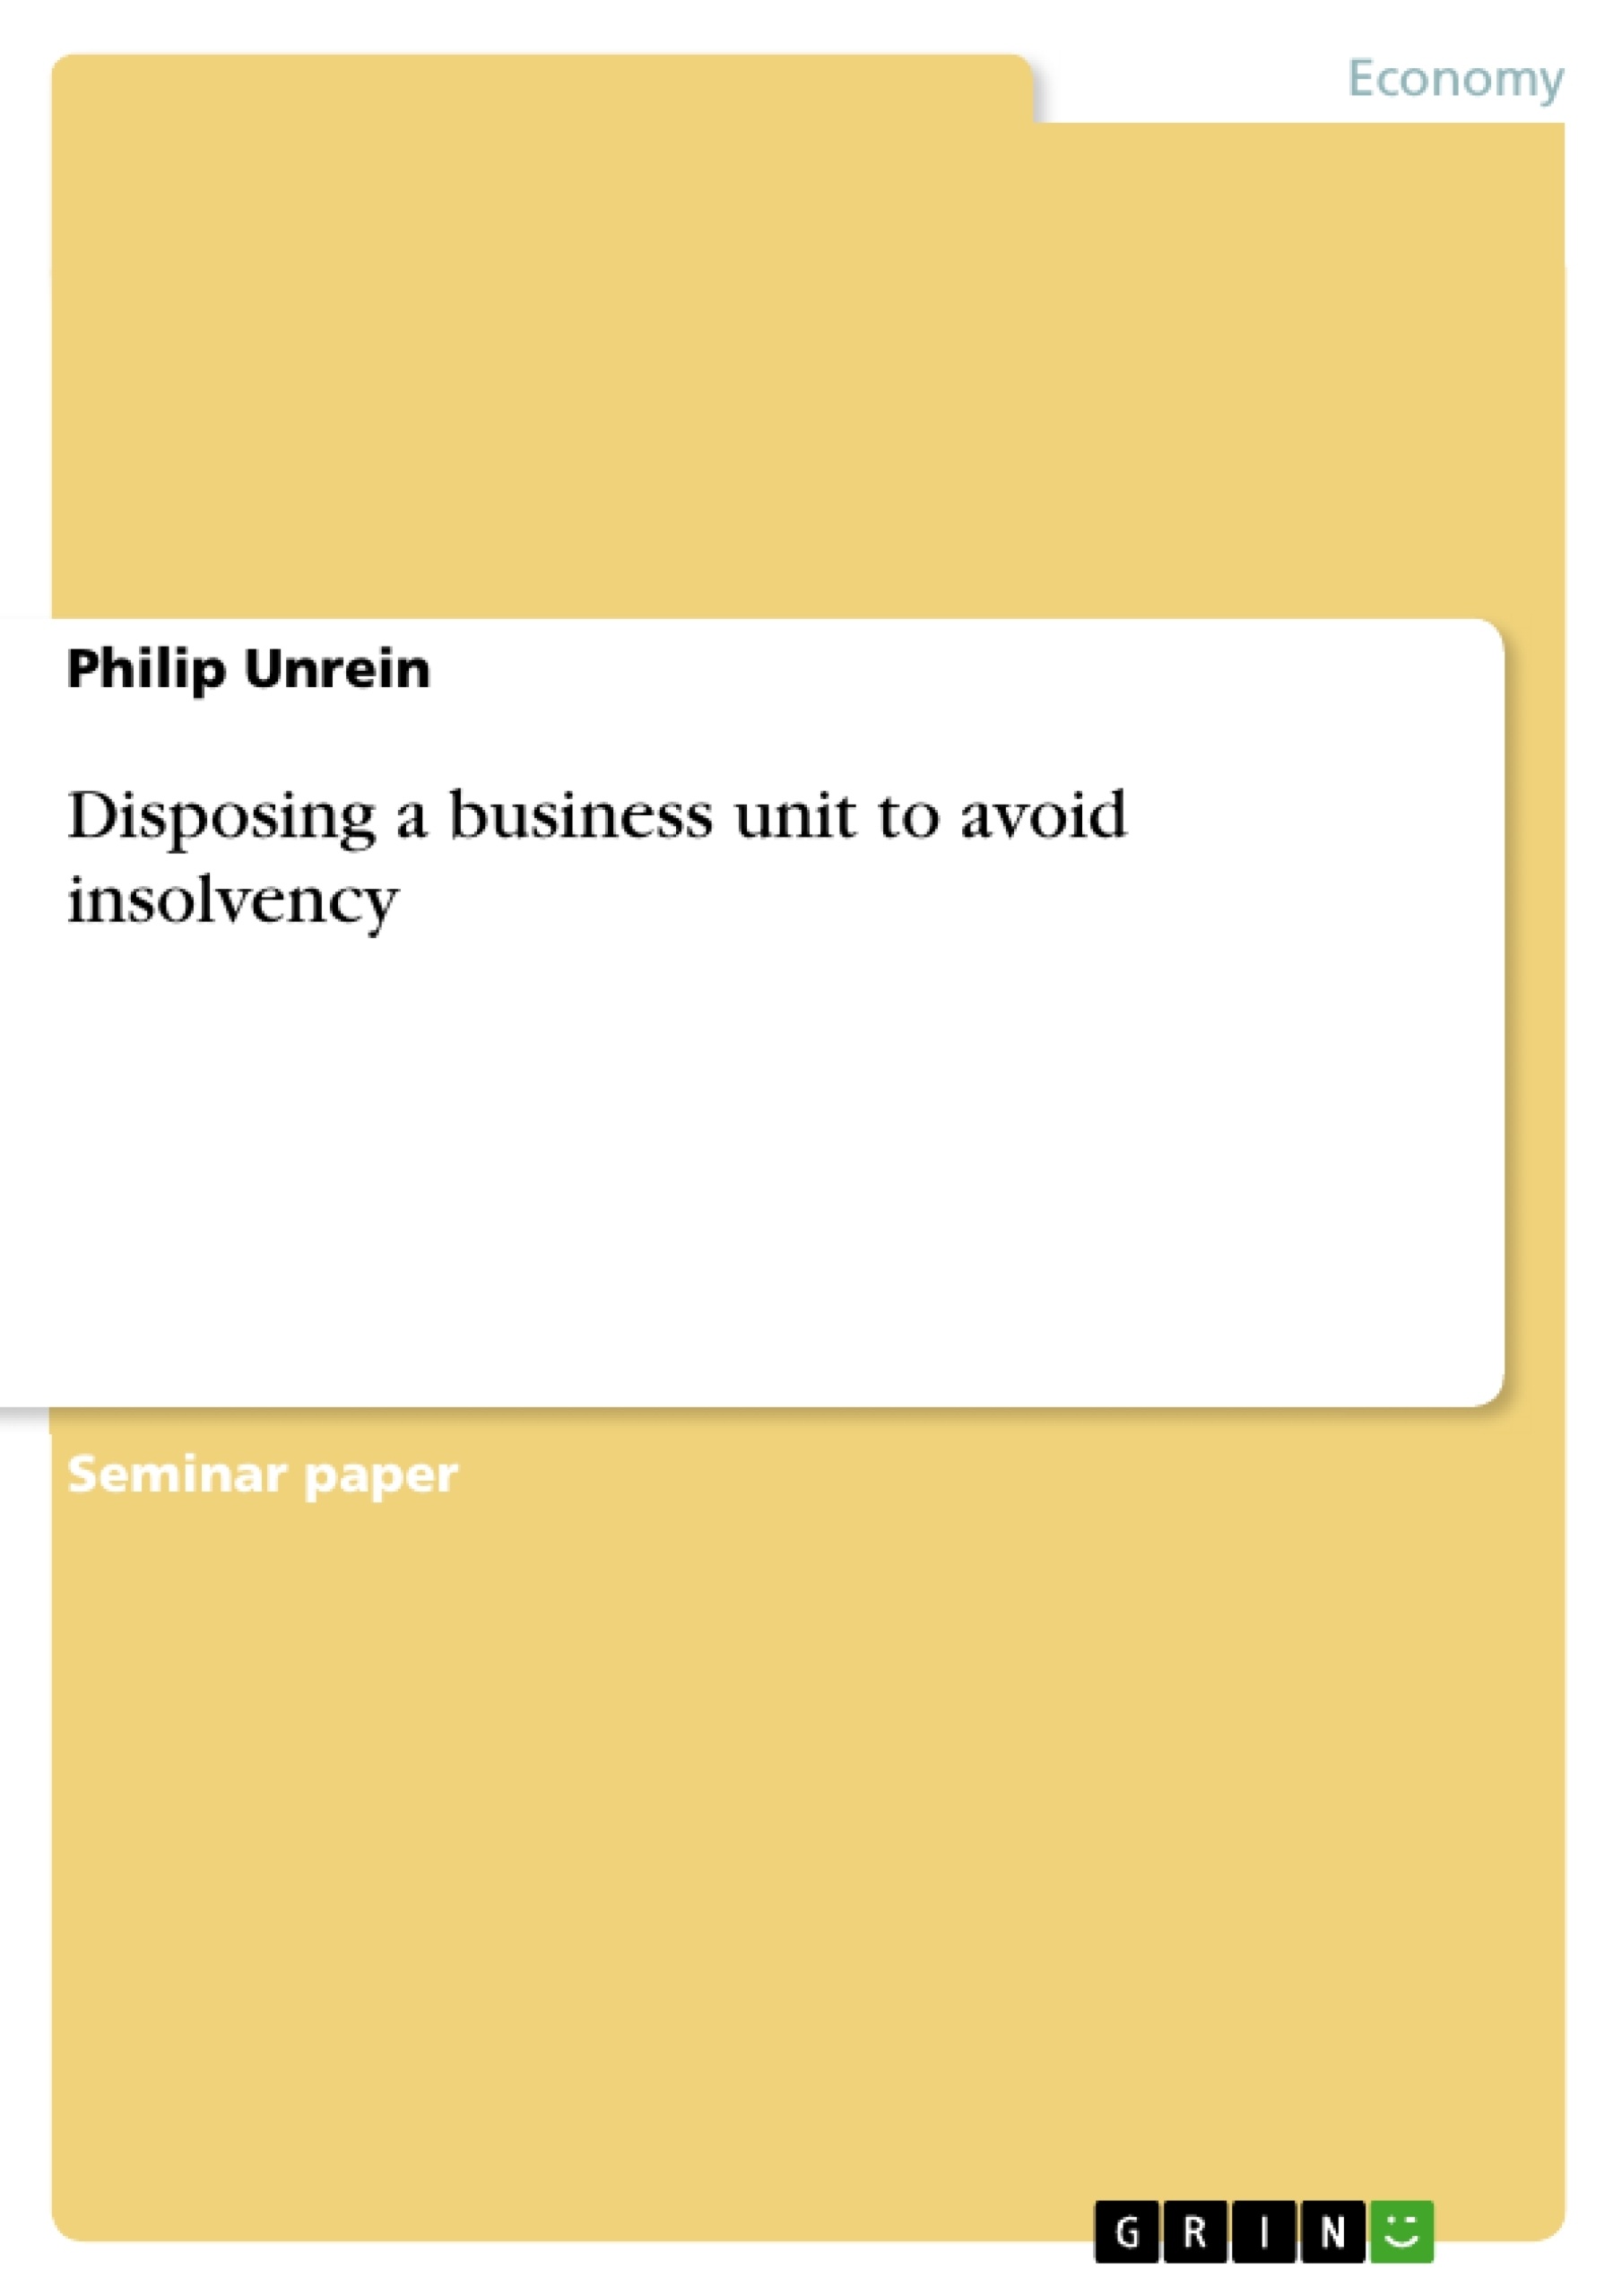 Titel: Disposing a business unit to avoid insolvency